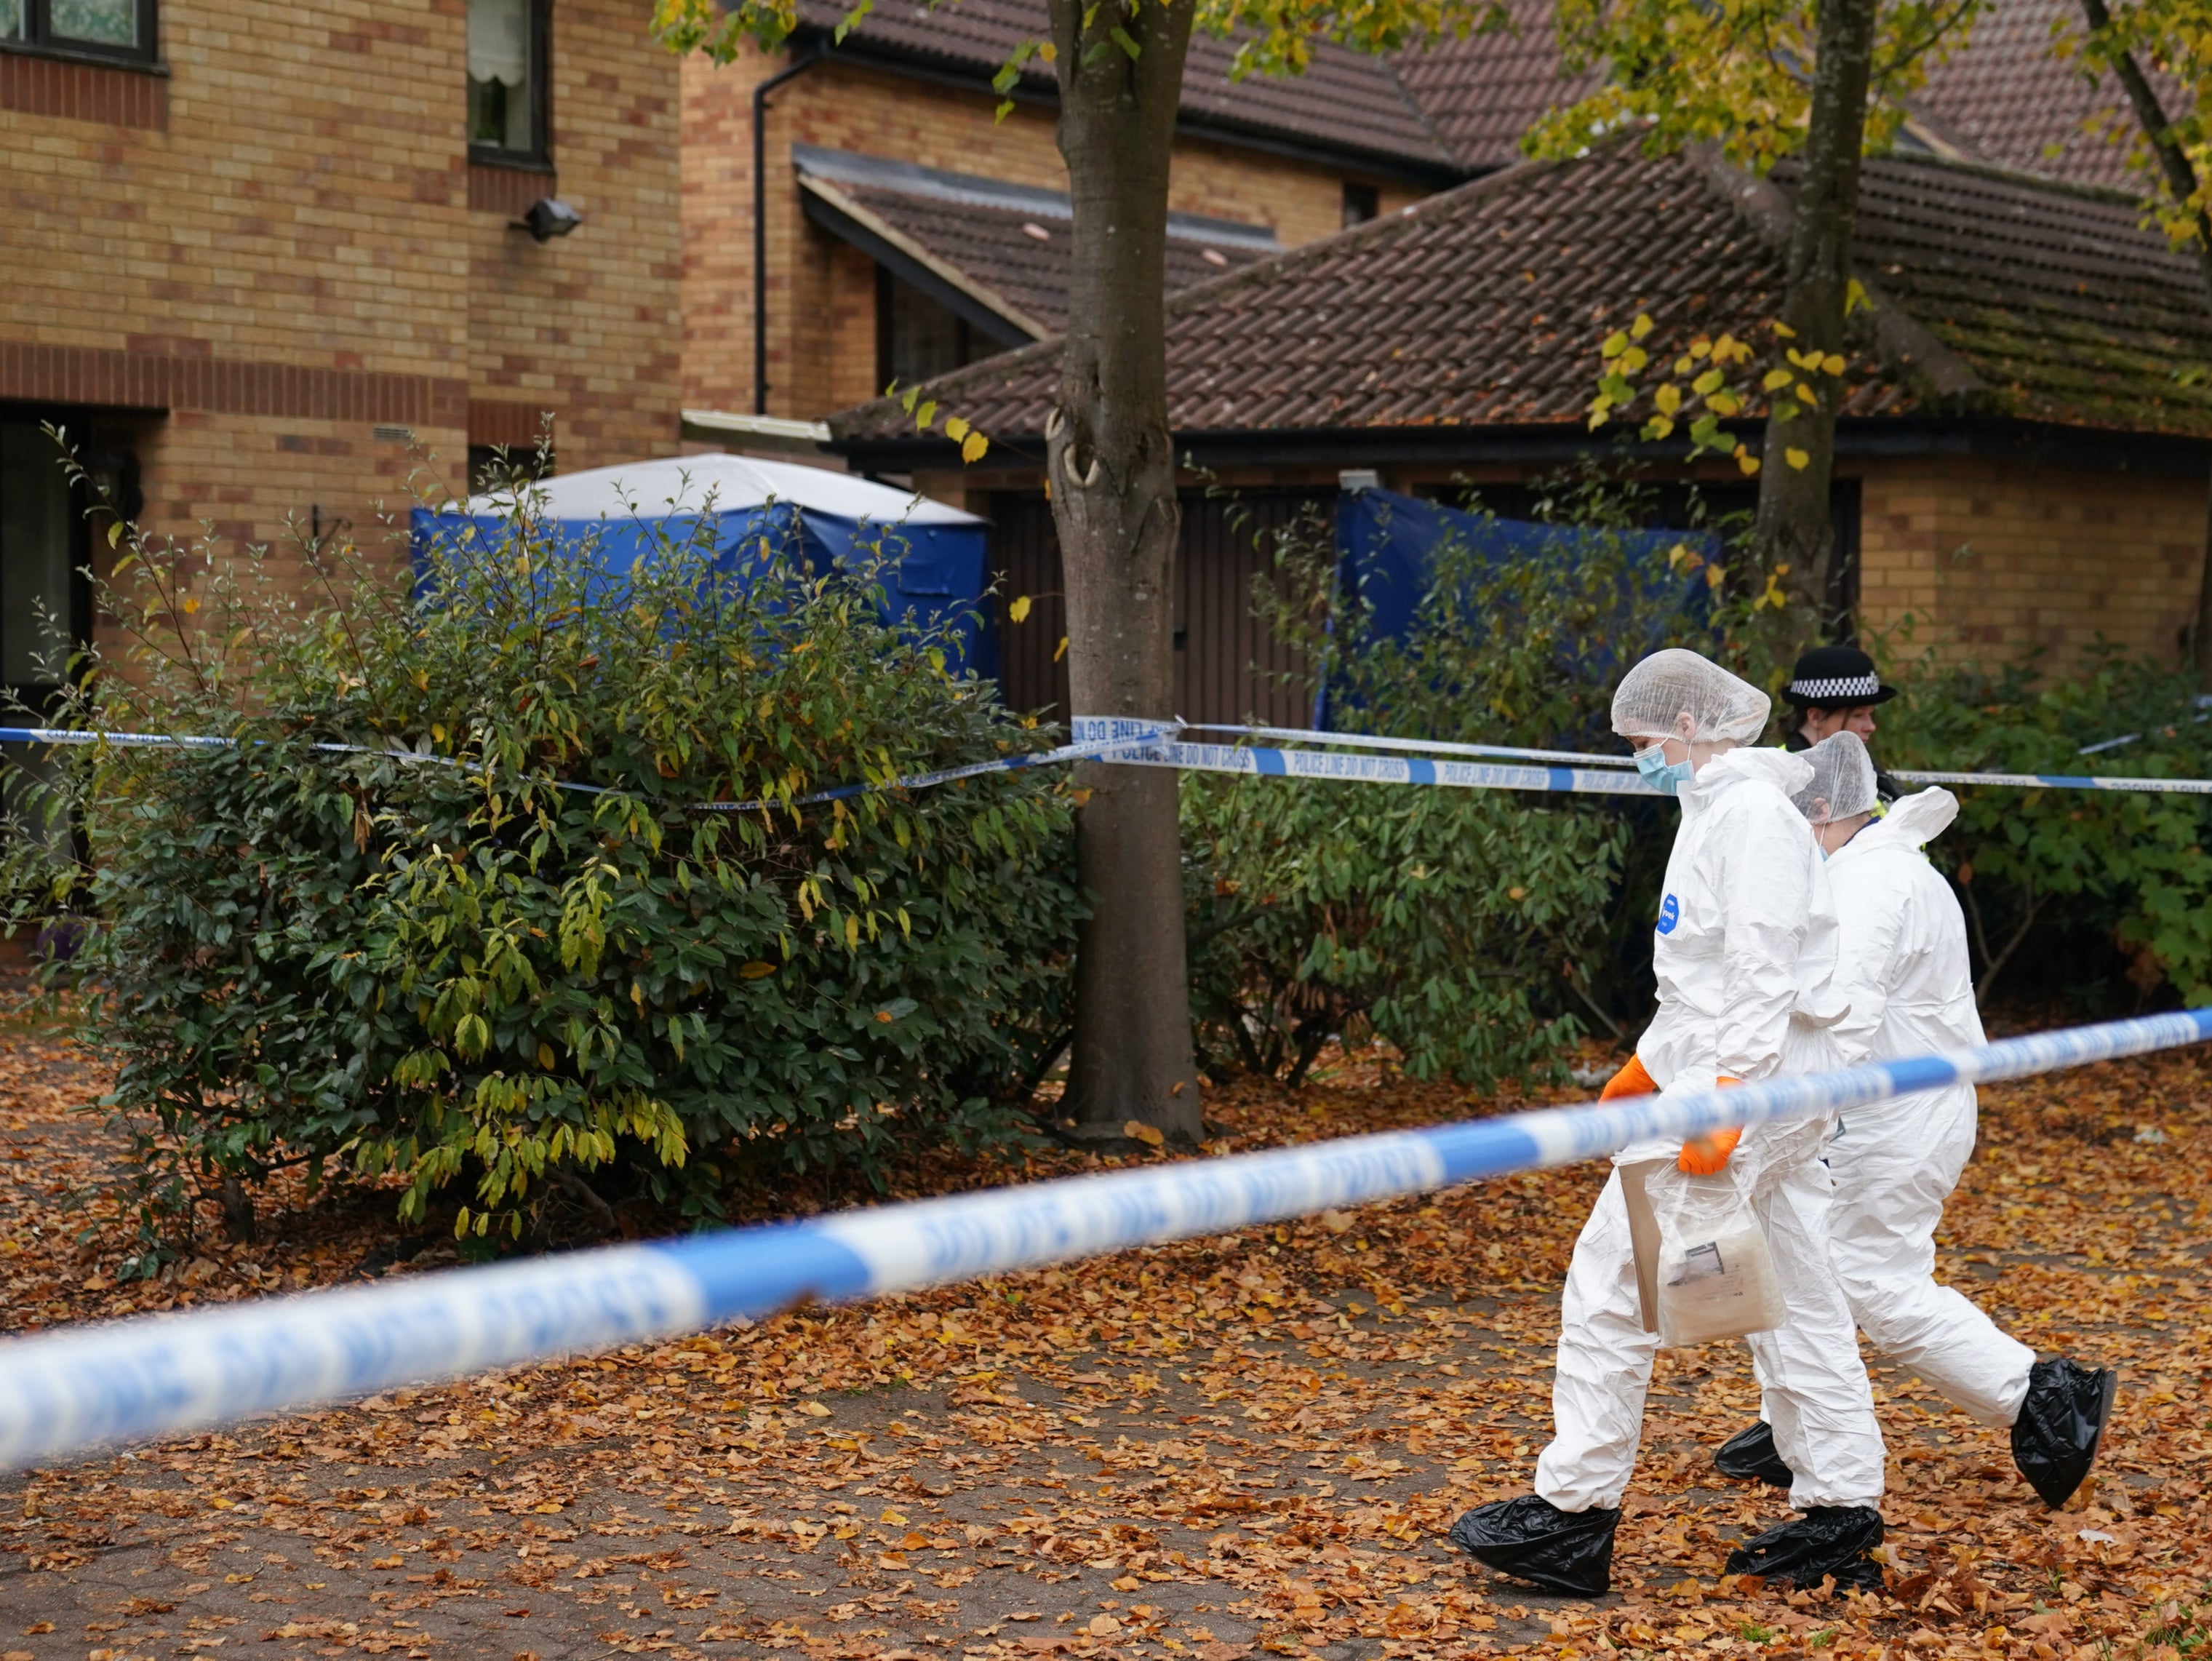 Human remains were found at the property in Milton Keynes earlier this week